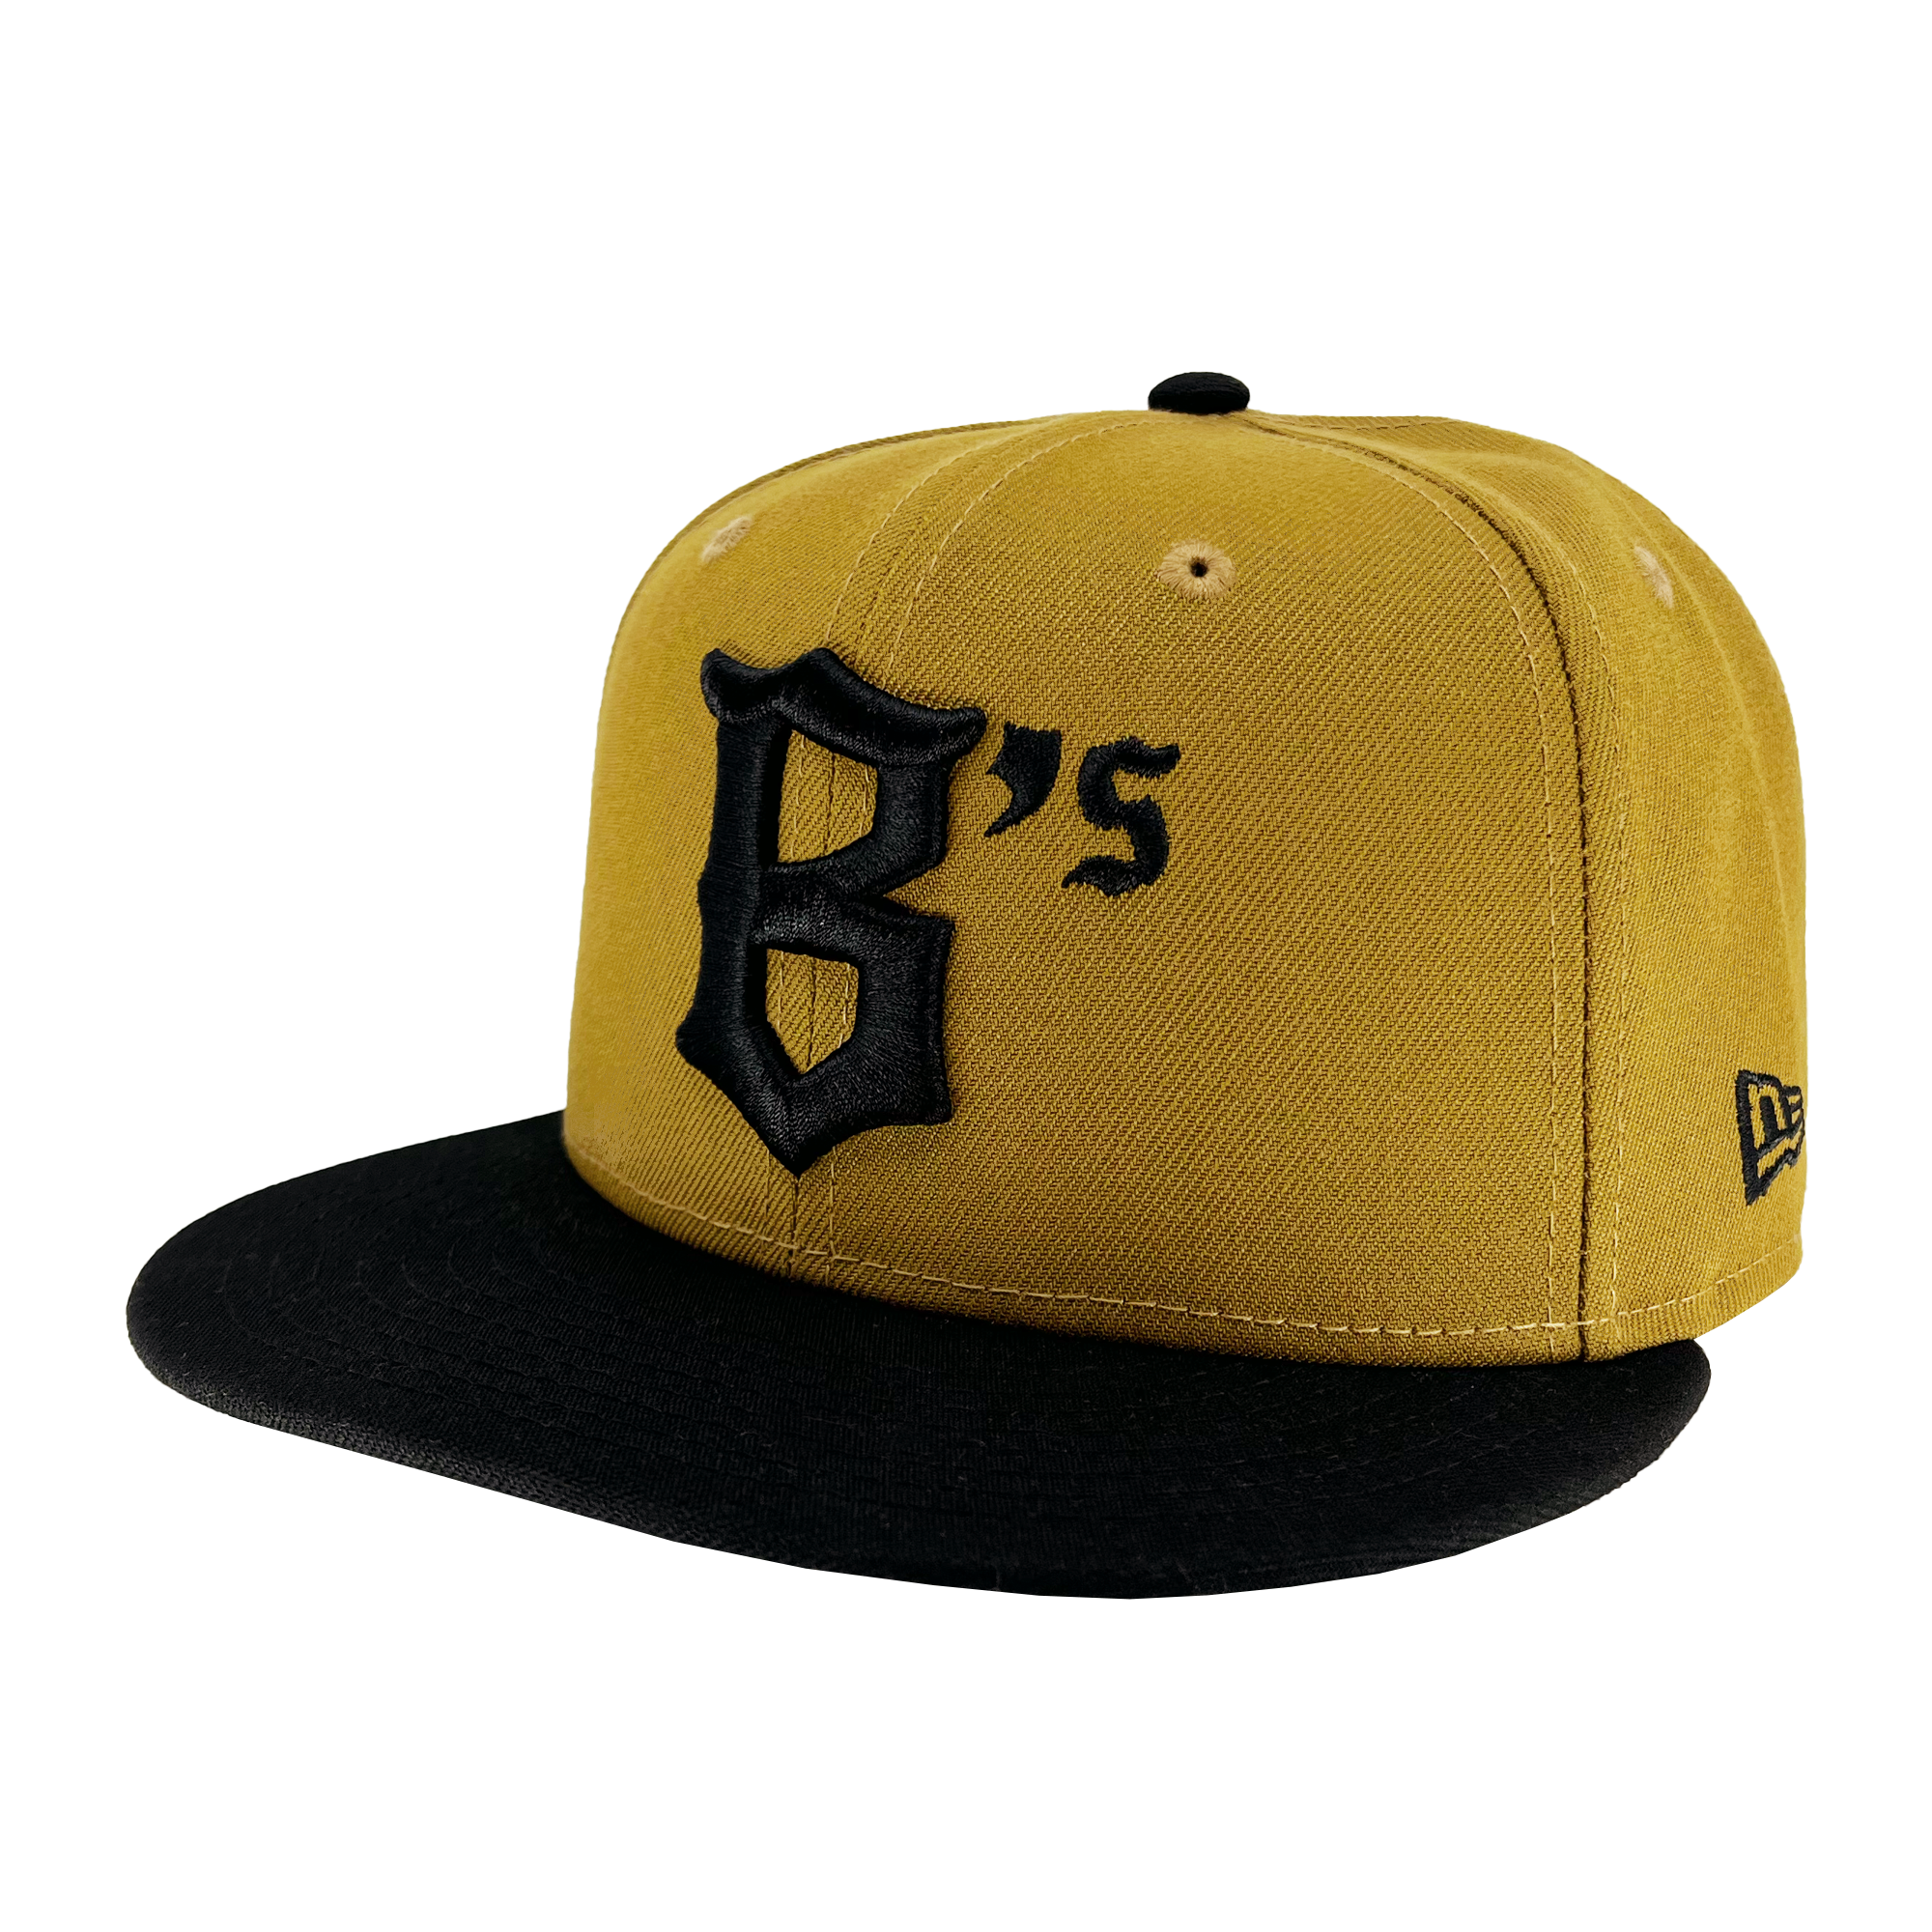 Side view of Gold New Era cap with black  embroidered Oakland Ballers baseball logo.